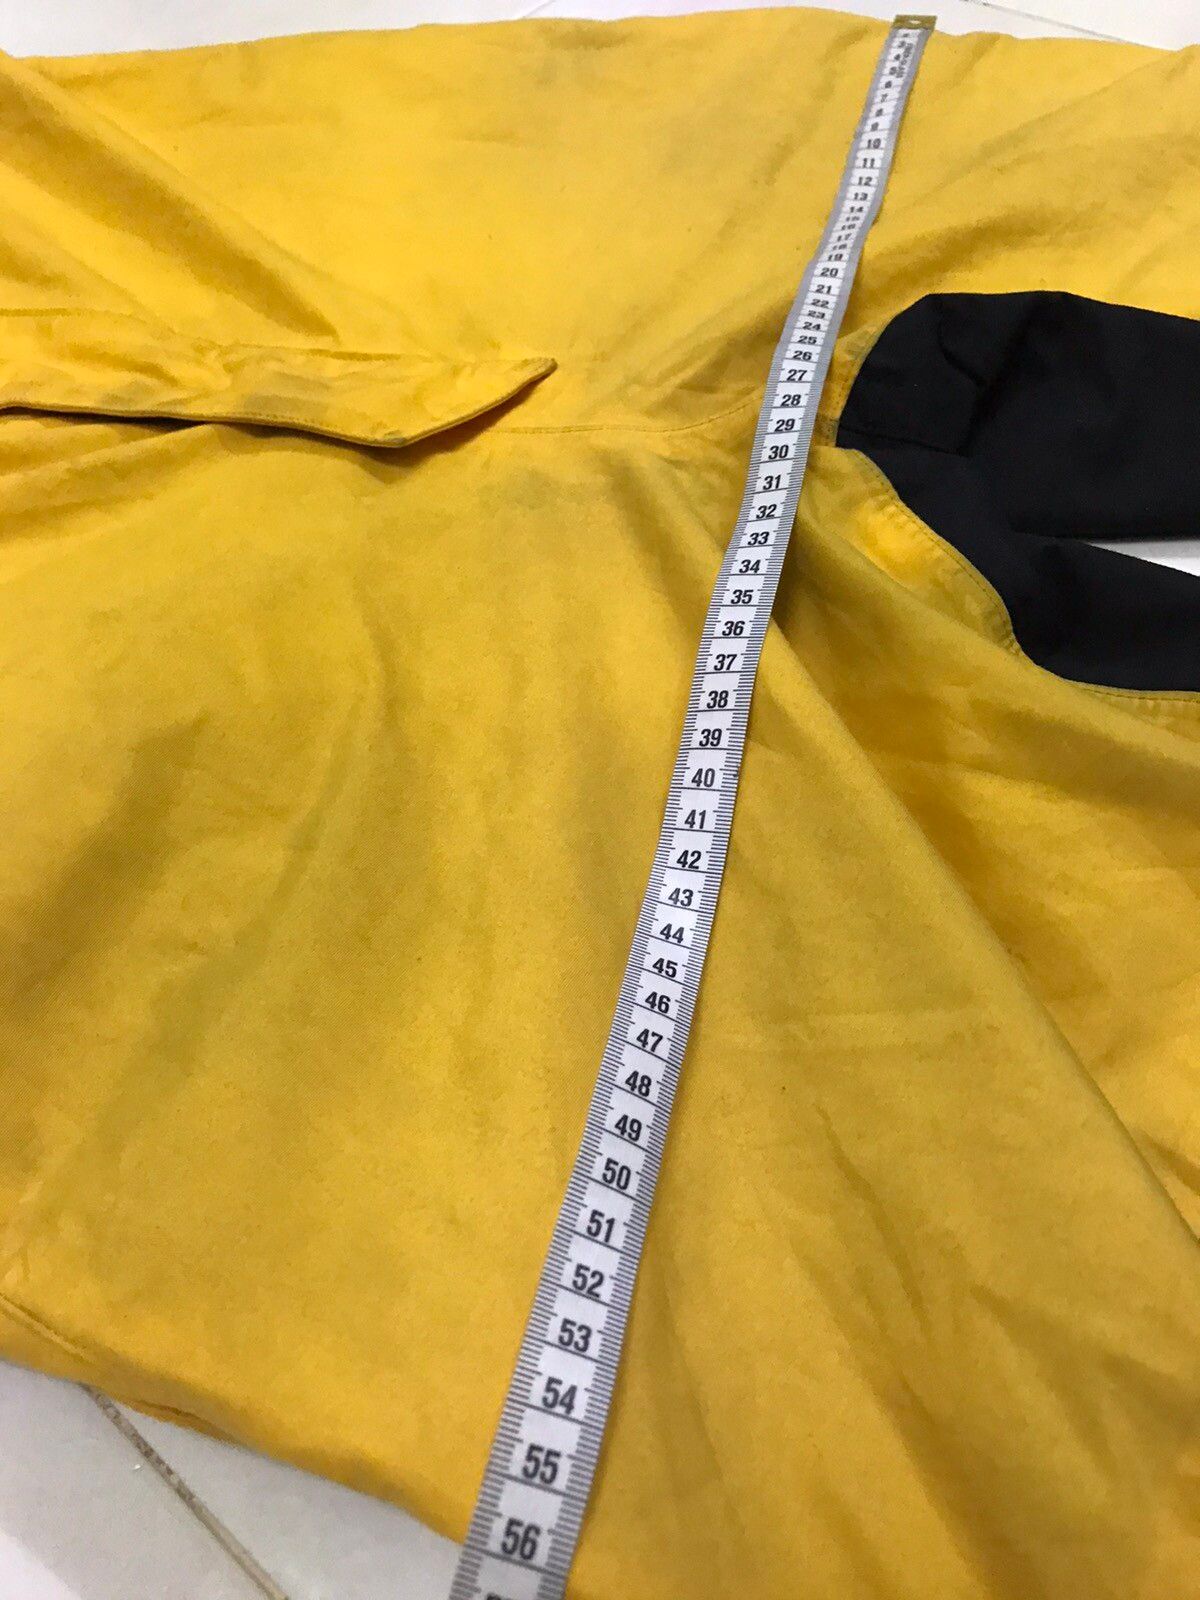 THE NORTH FACE” GORE-TEX SKI PANTS BIBS OVERALLS IN YELLOW - 12